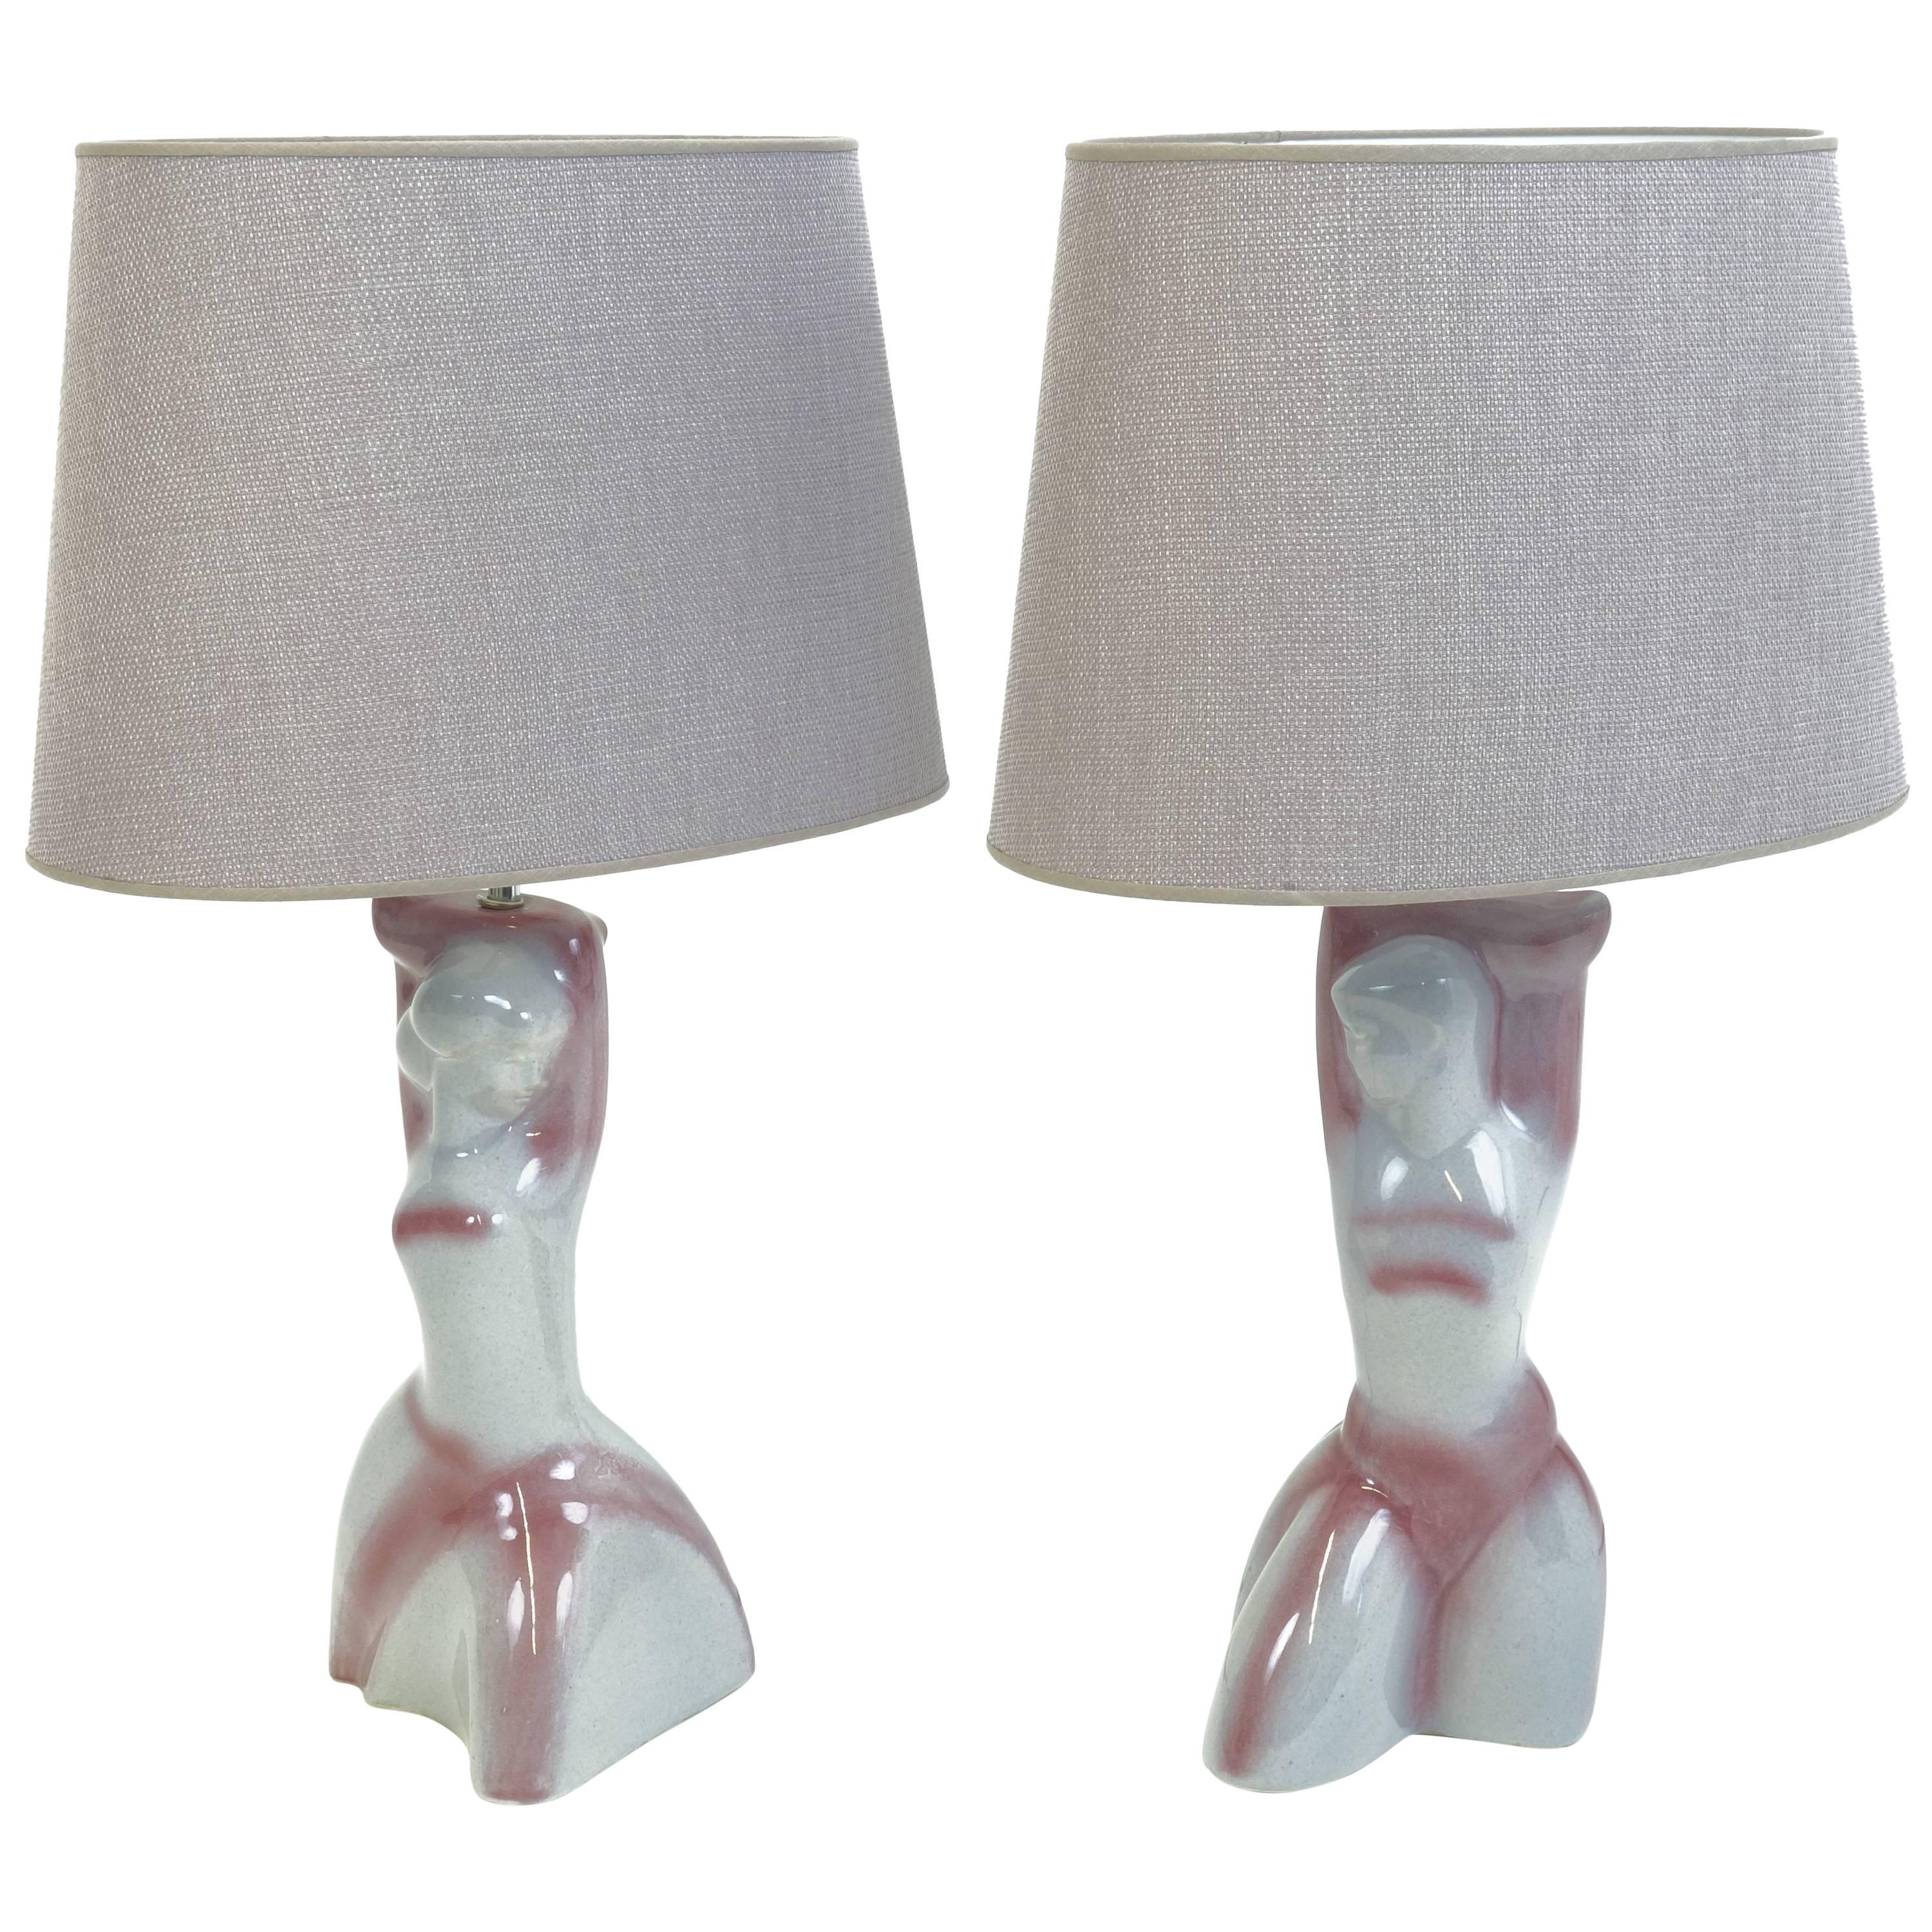 Two Art Deco Tablelamps of Glazed Ceramic with Mauve Shades For Sale